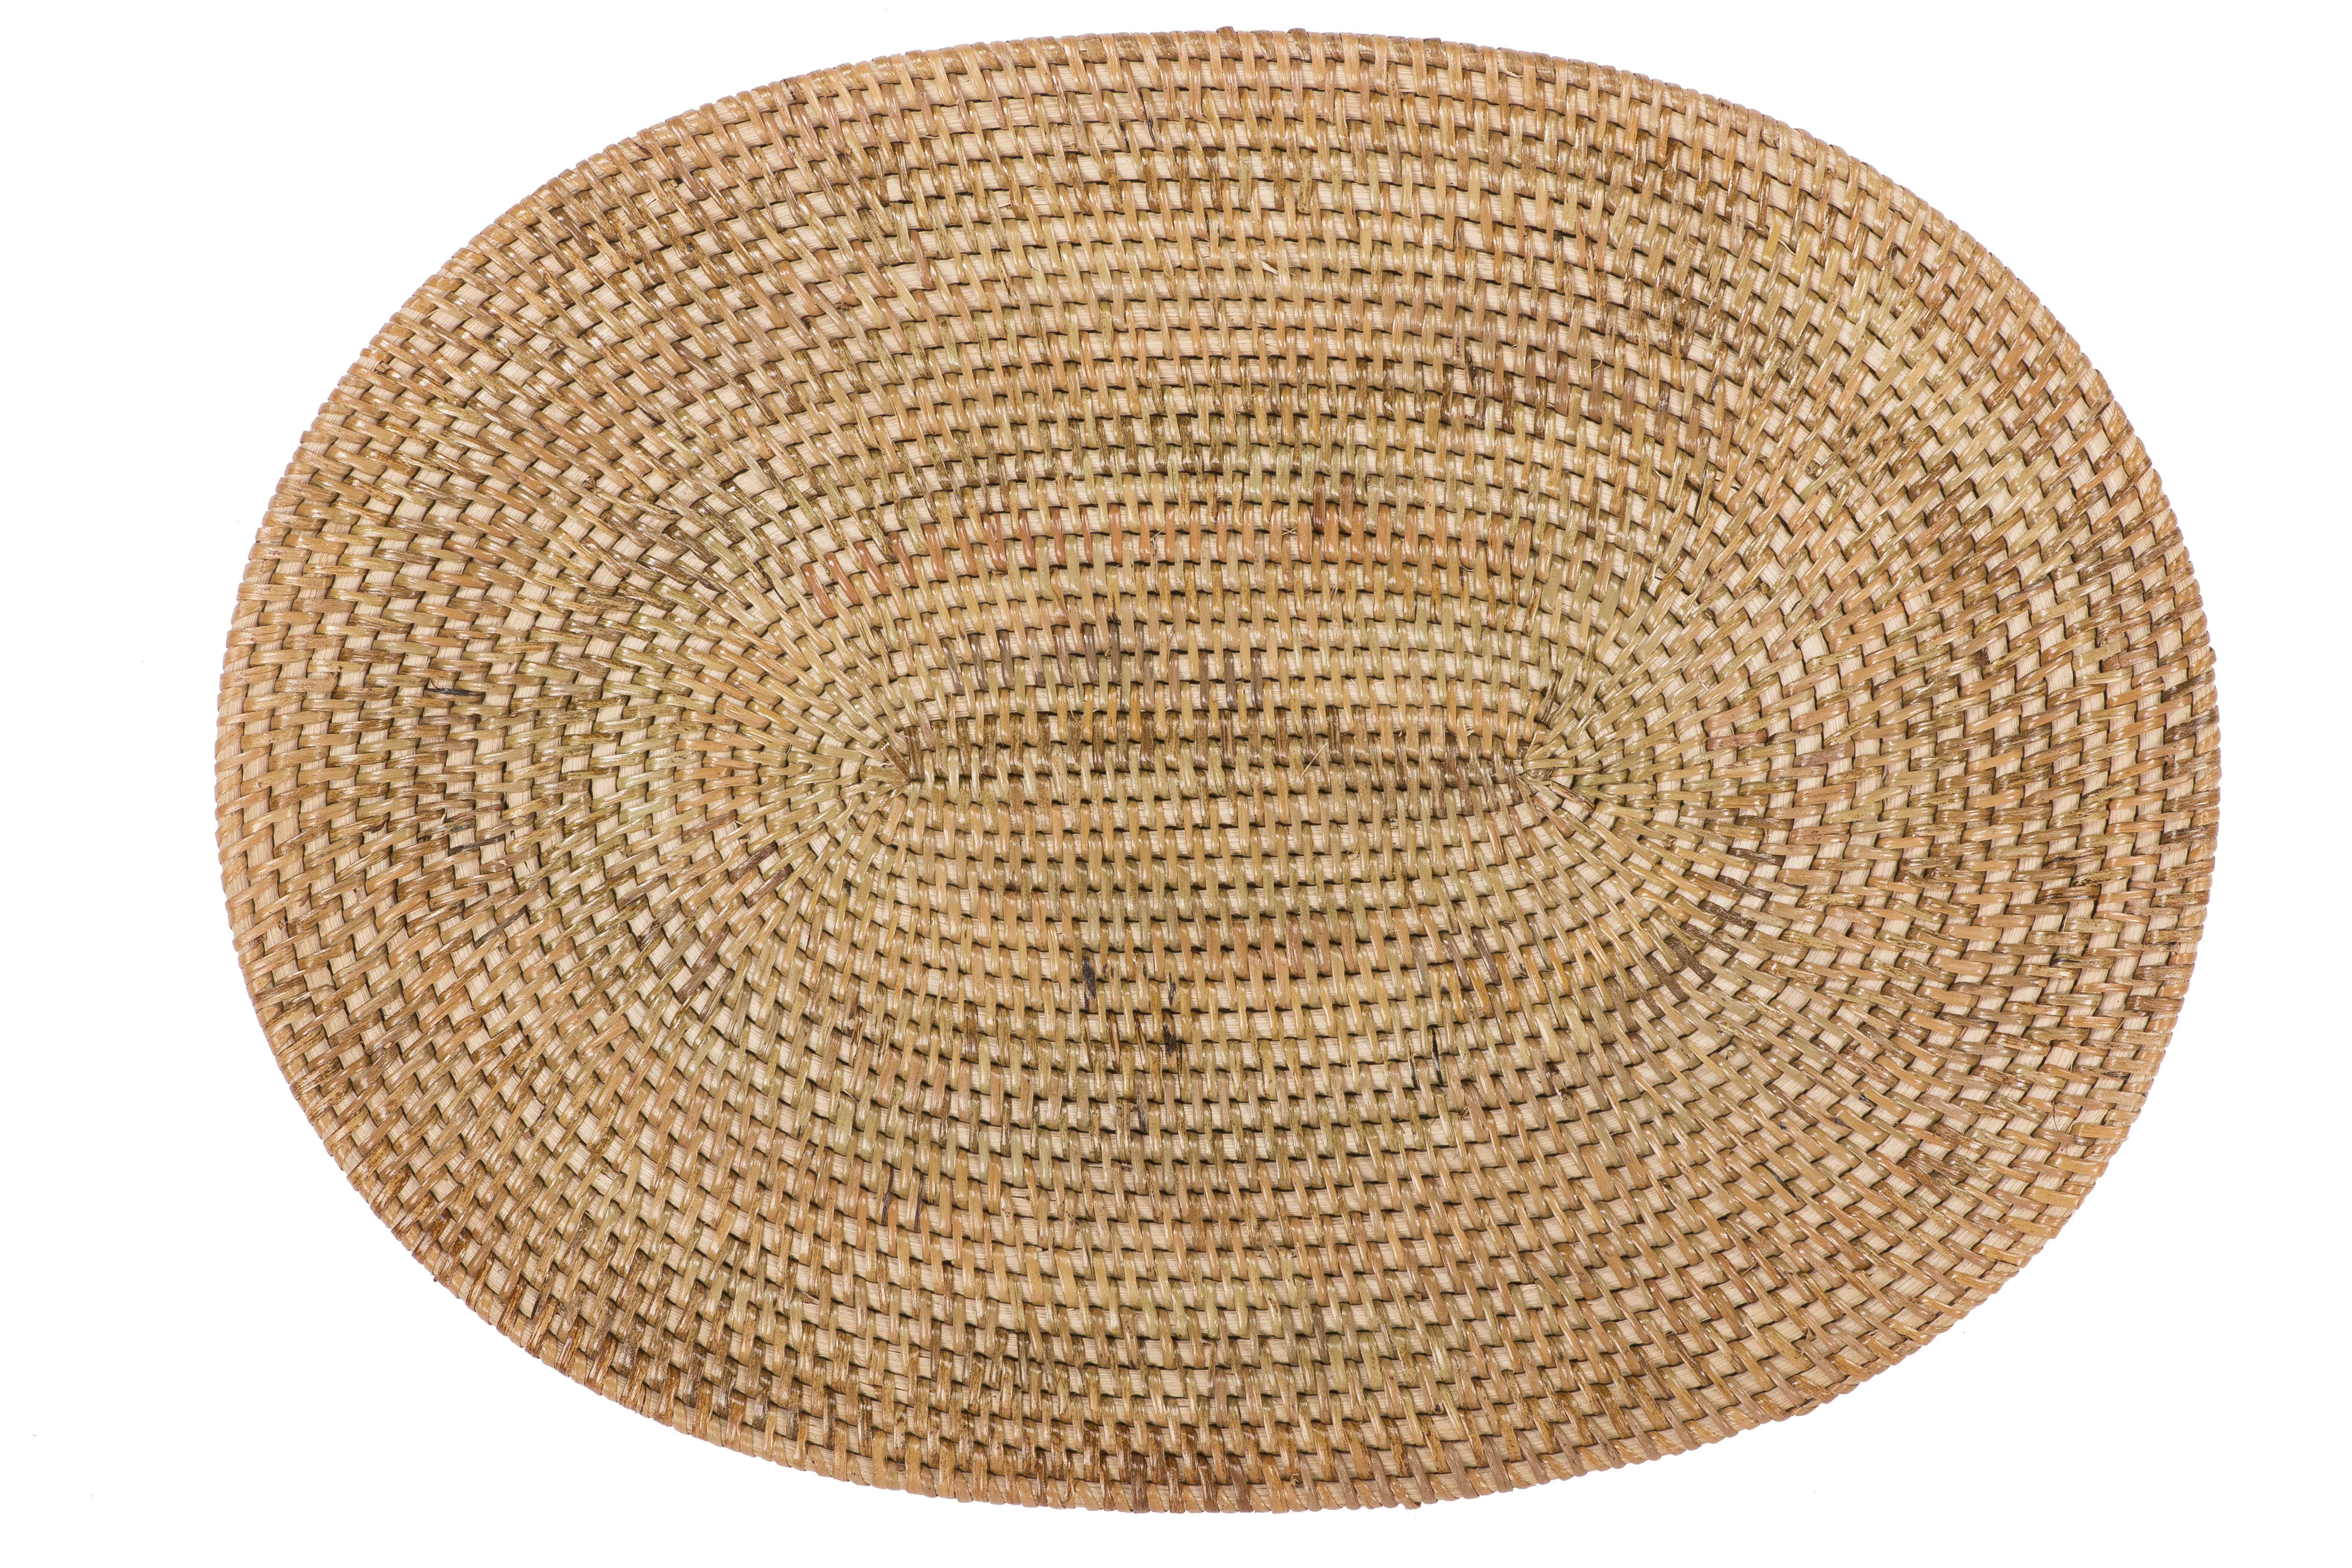 Placemat rattan, round 30x40 cm, oval, natural